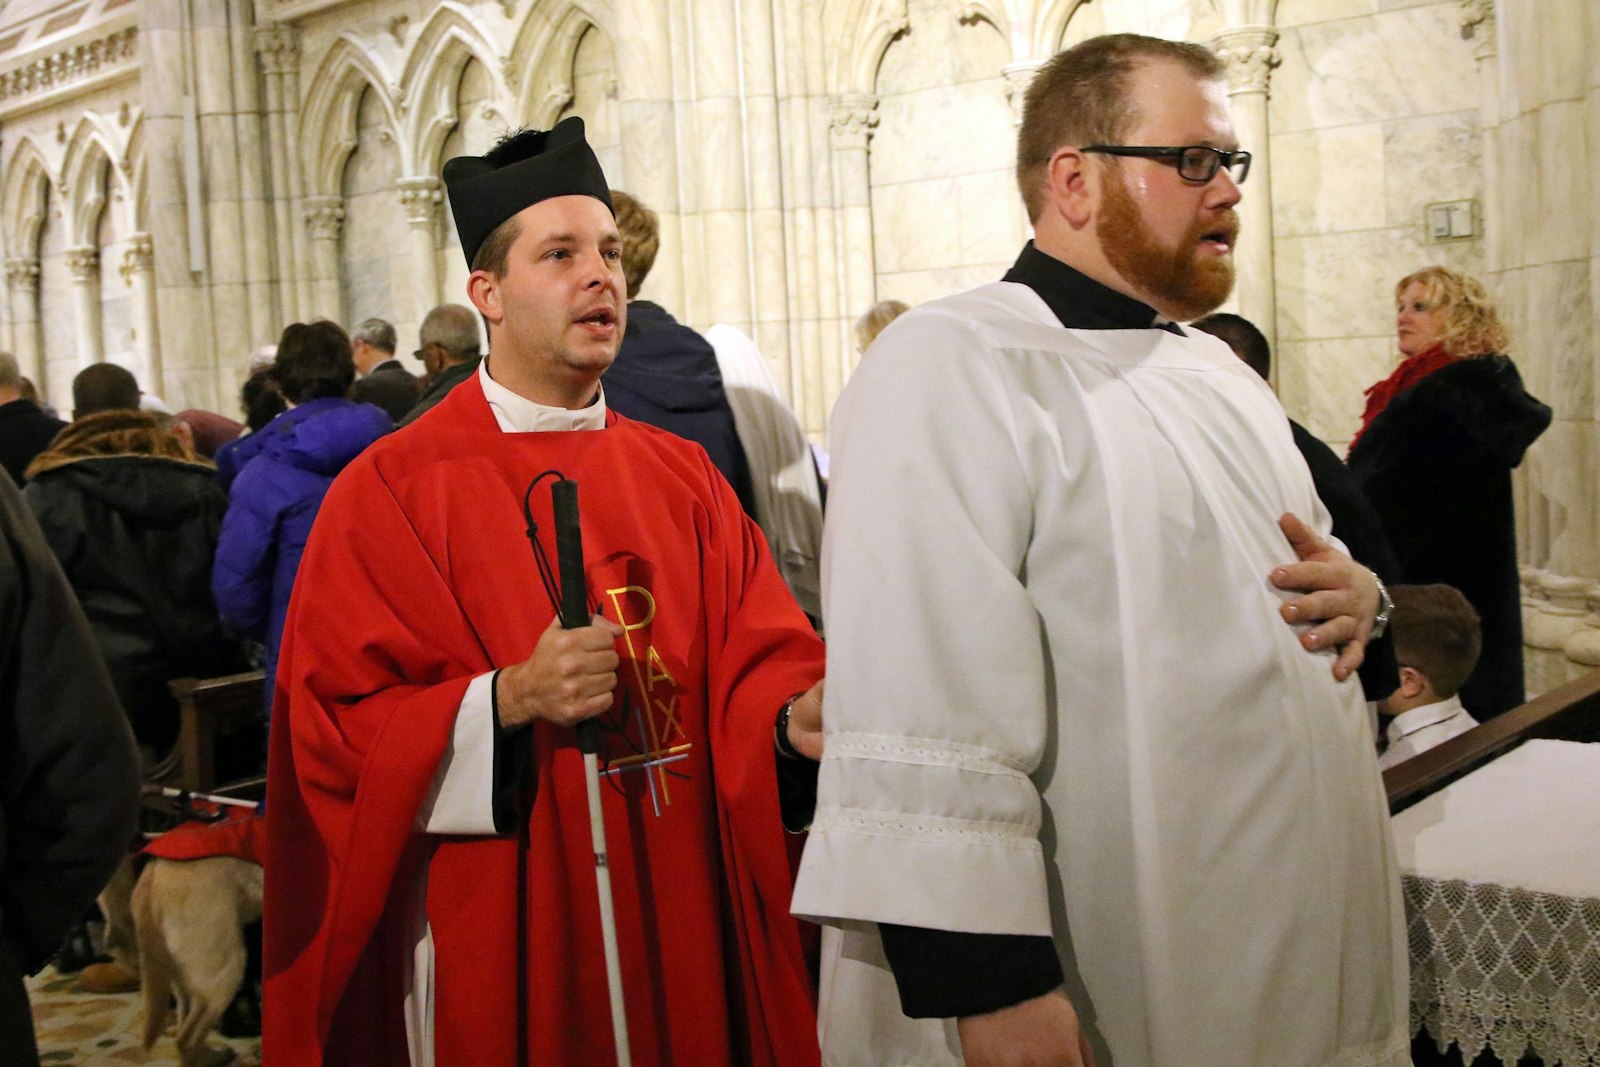 A file photo shows Fr. Jamie Dennis, who is blind and serves in the Diocese of Owensboro, Ky., being assisted by seminarian Chris Kight after celebrating a Mass marking the feast of St. Lucy, patroness of the blind, at St. Patrick's Cathedral in New York City. ((OSV News photo/Gregory A. Shemitz)